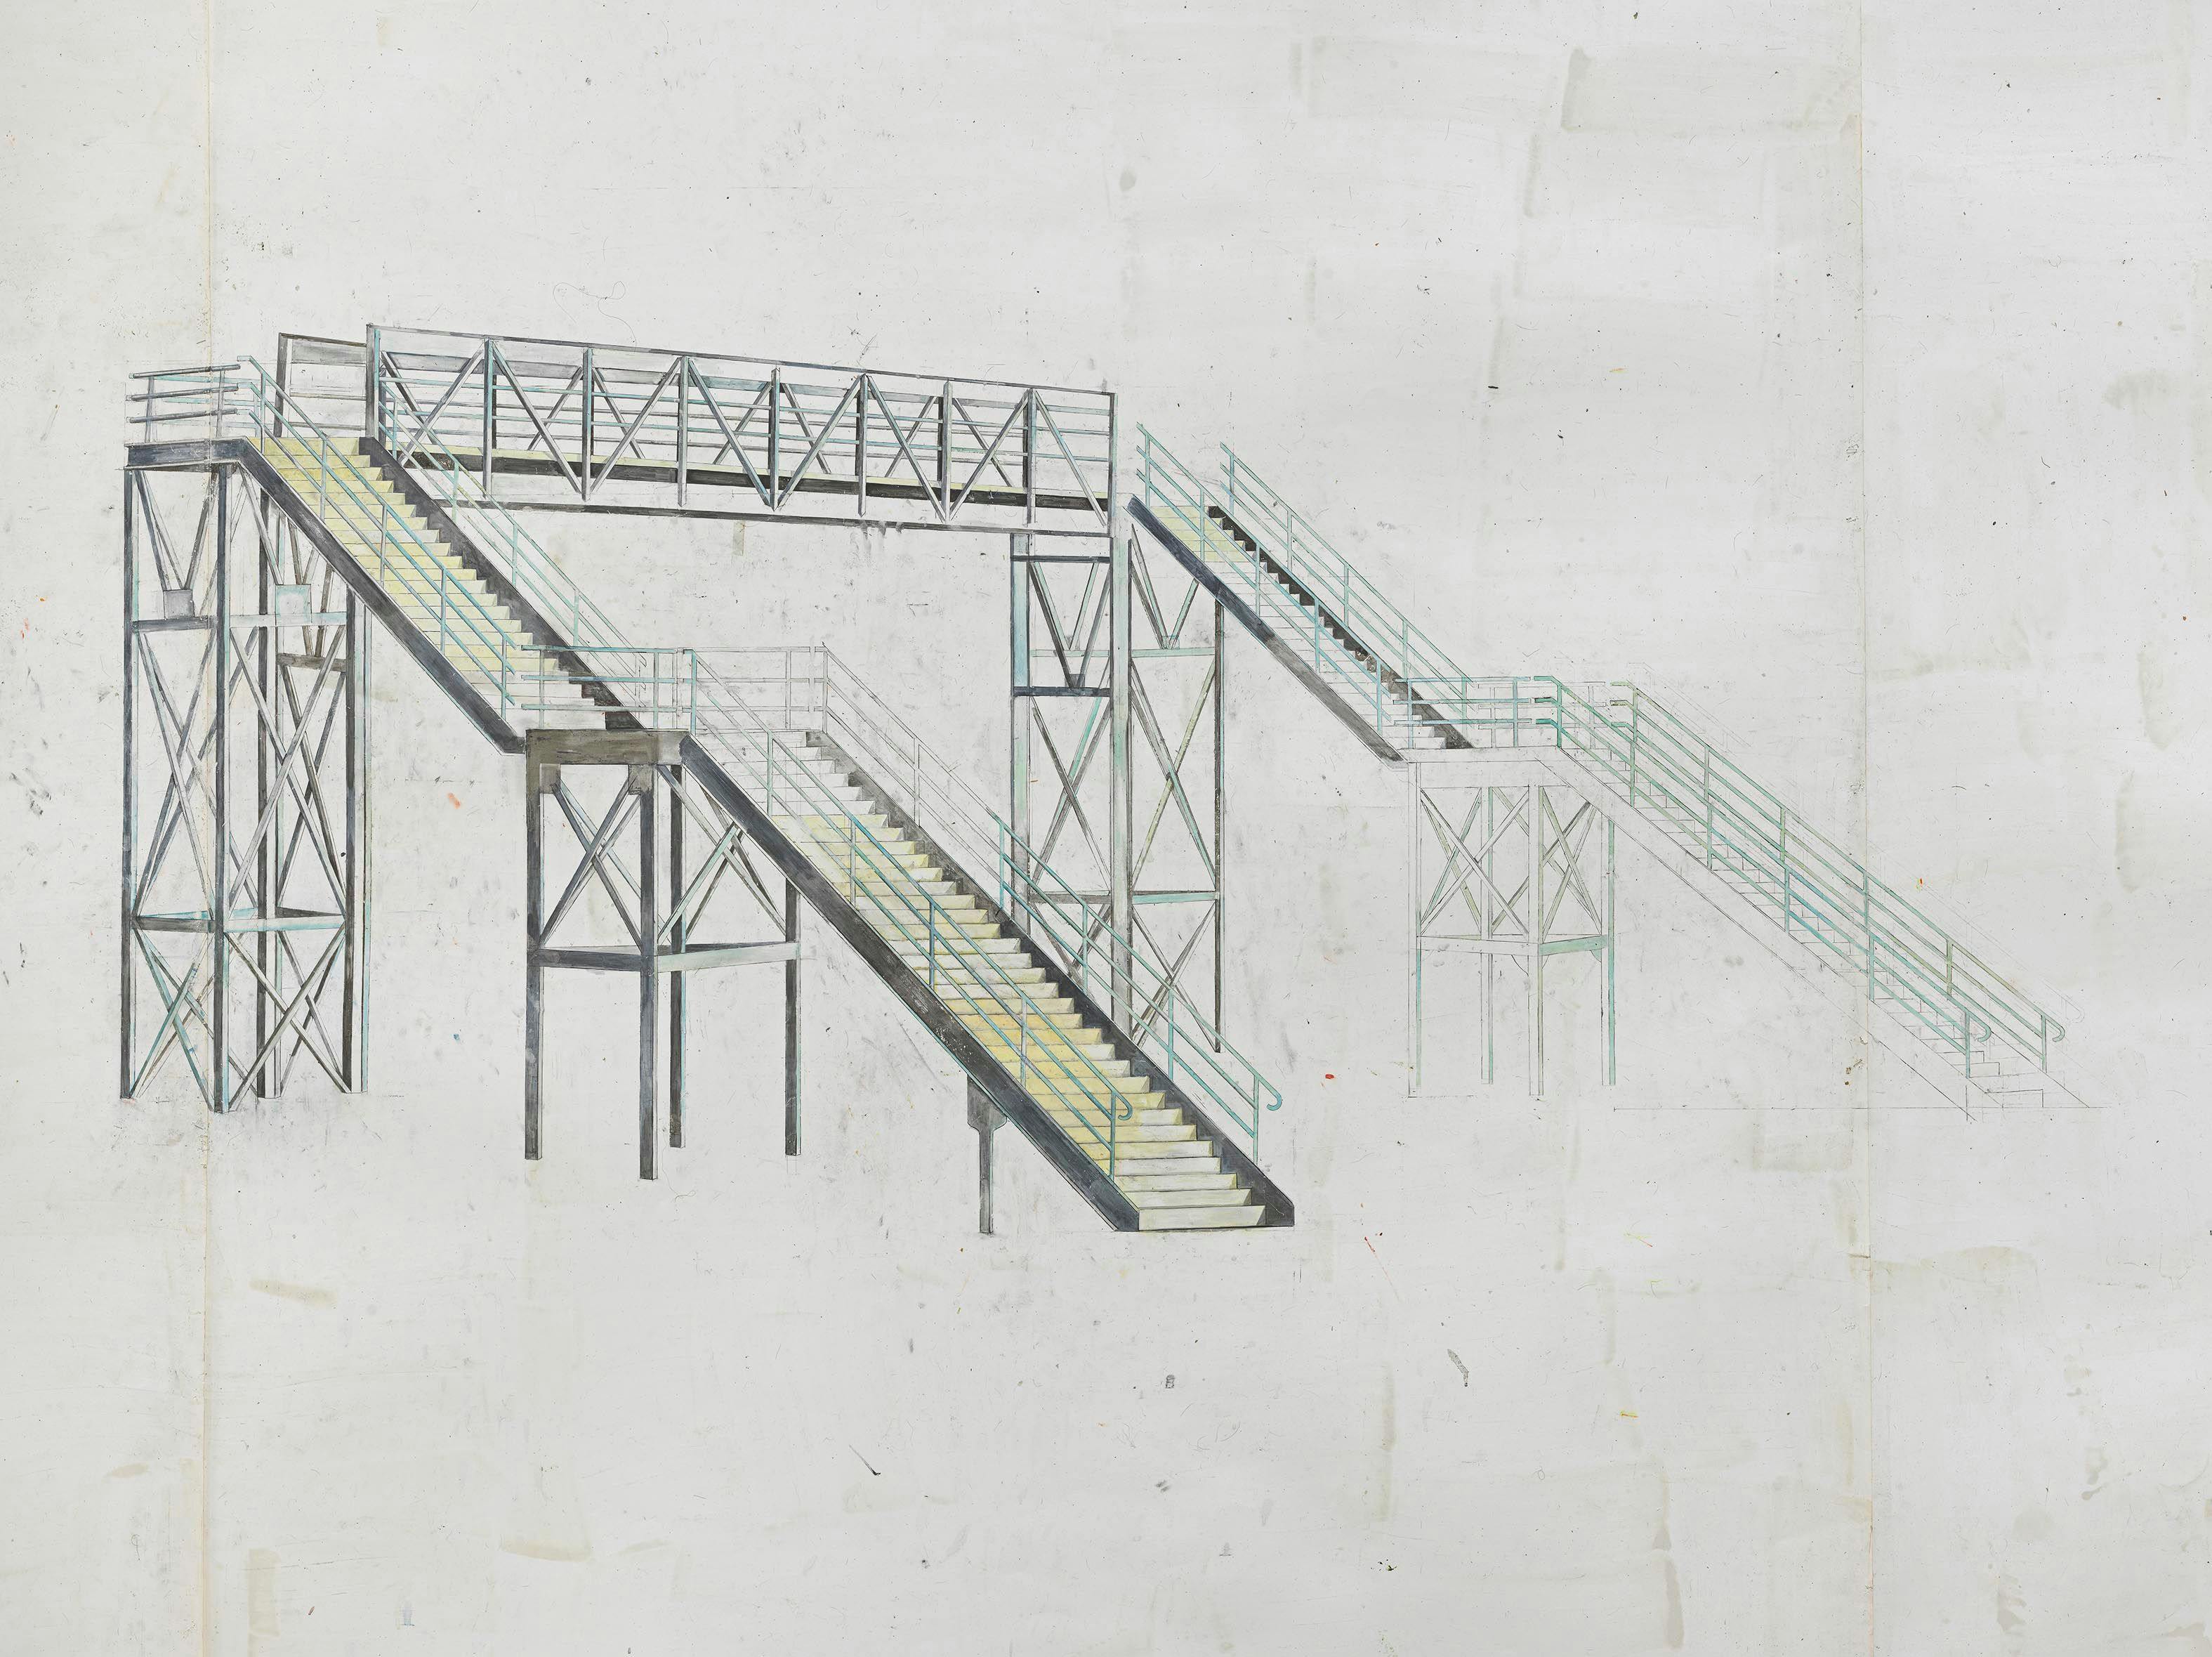 A drawing by Toba Khedoori, titled Untitled (overpass), dated 1994